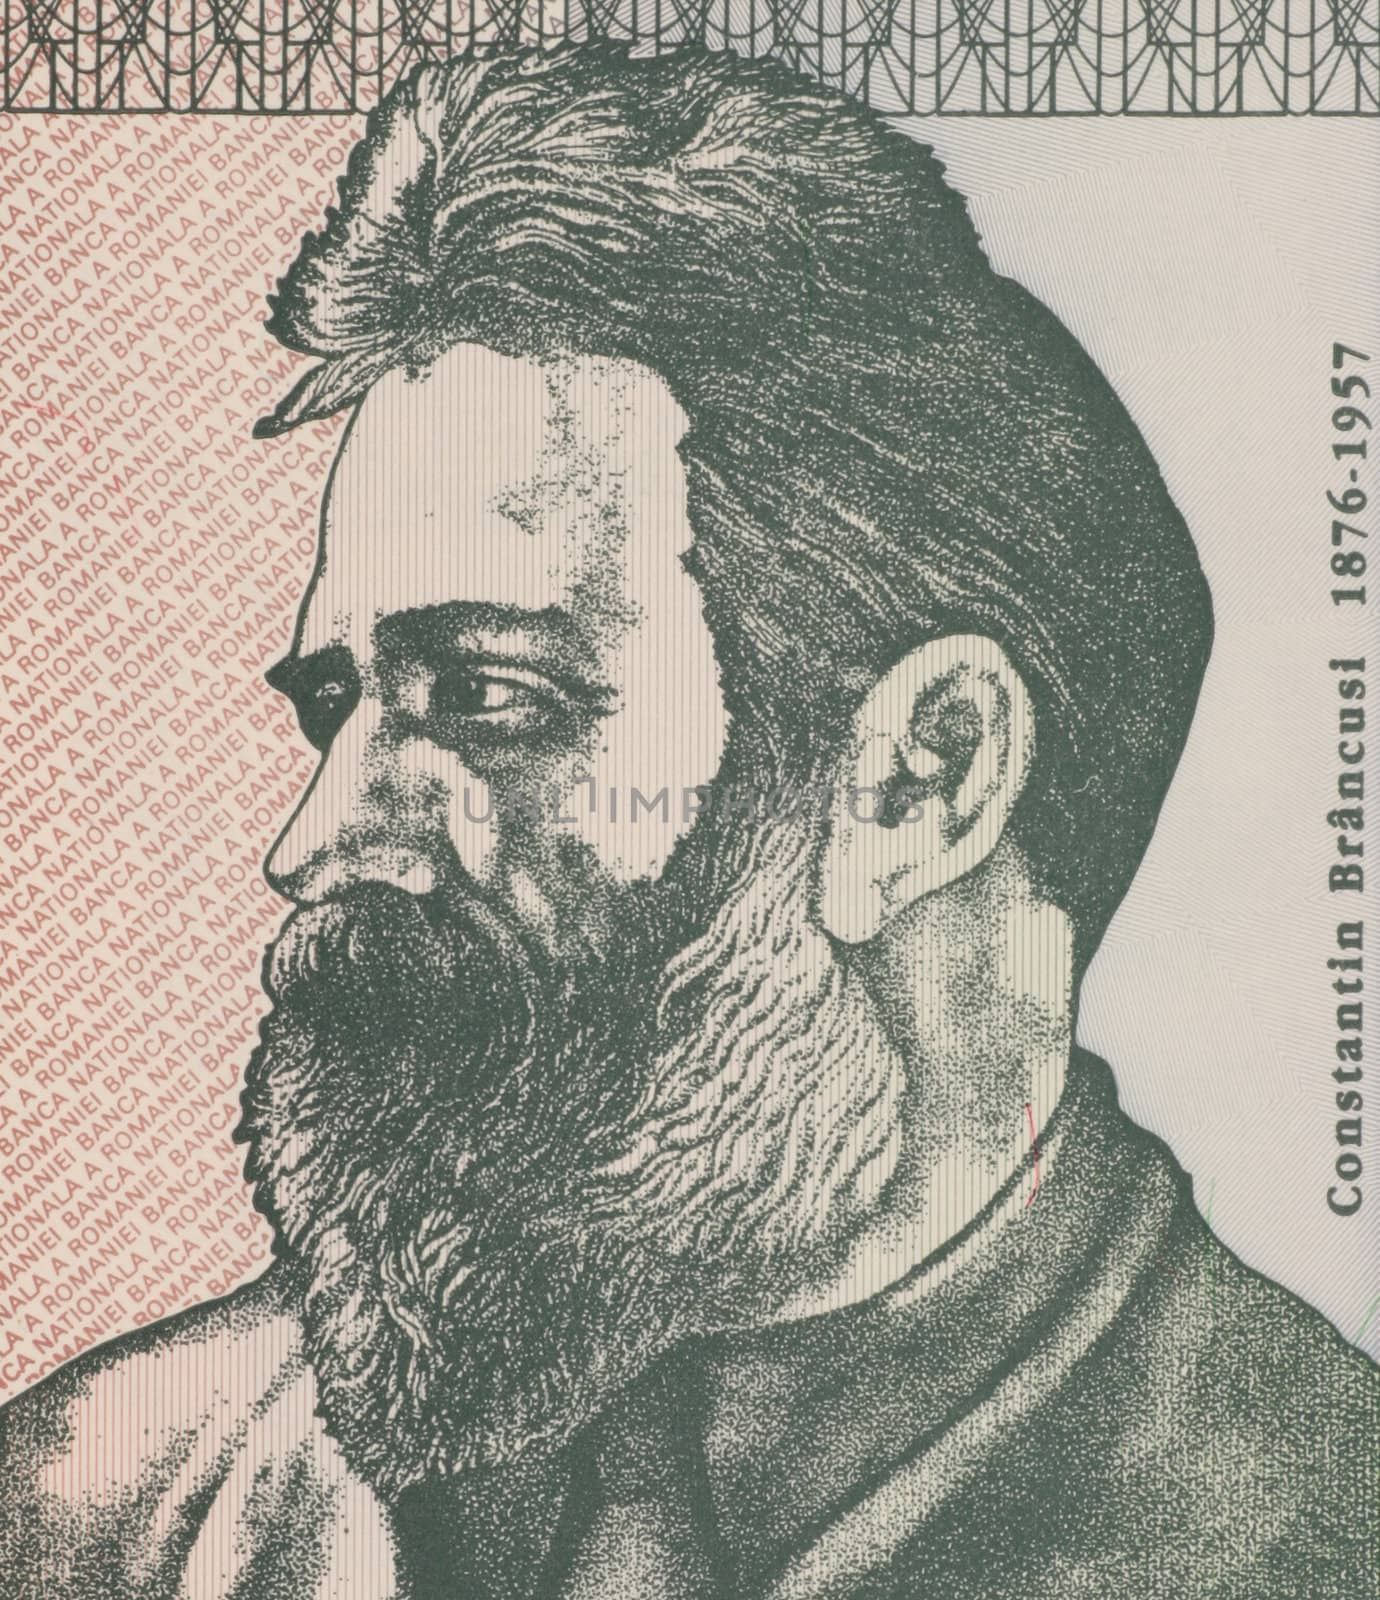 Constantin Brancusi on 500 Lei 1992 Banknote from Romania. Internationally renowned sculptor whose work blend simplicity and sophistication while led the way for modernist sculptors.